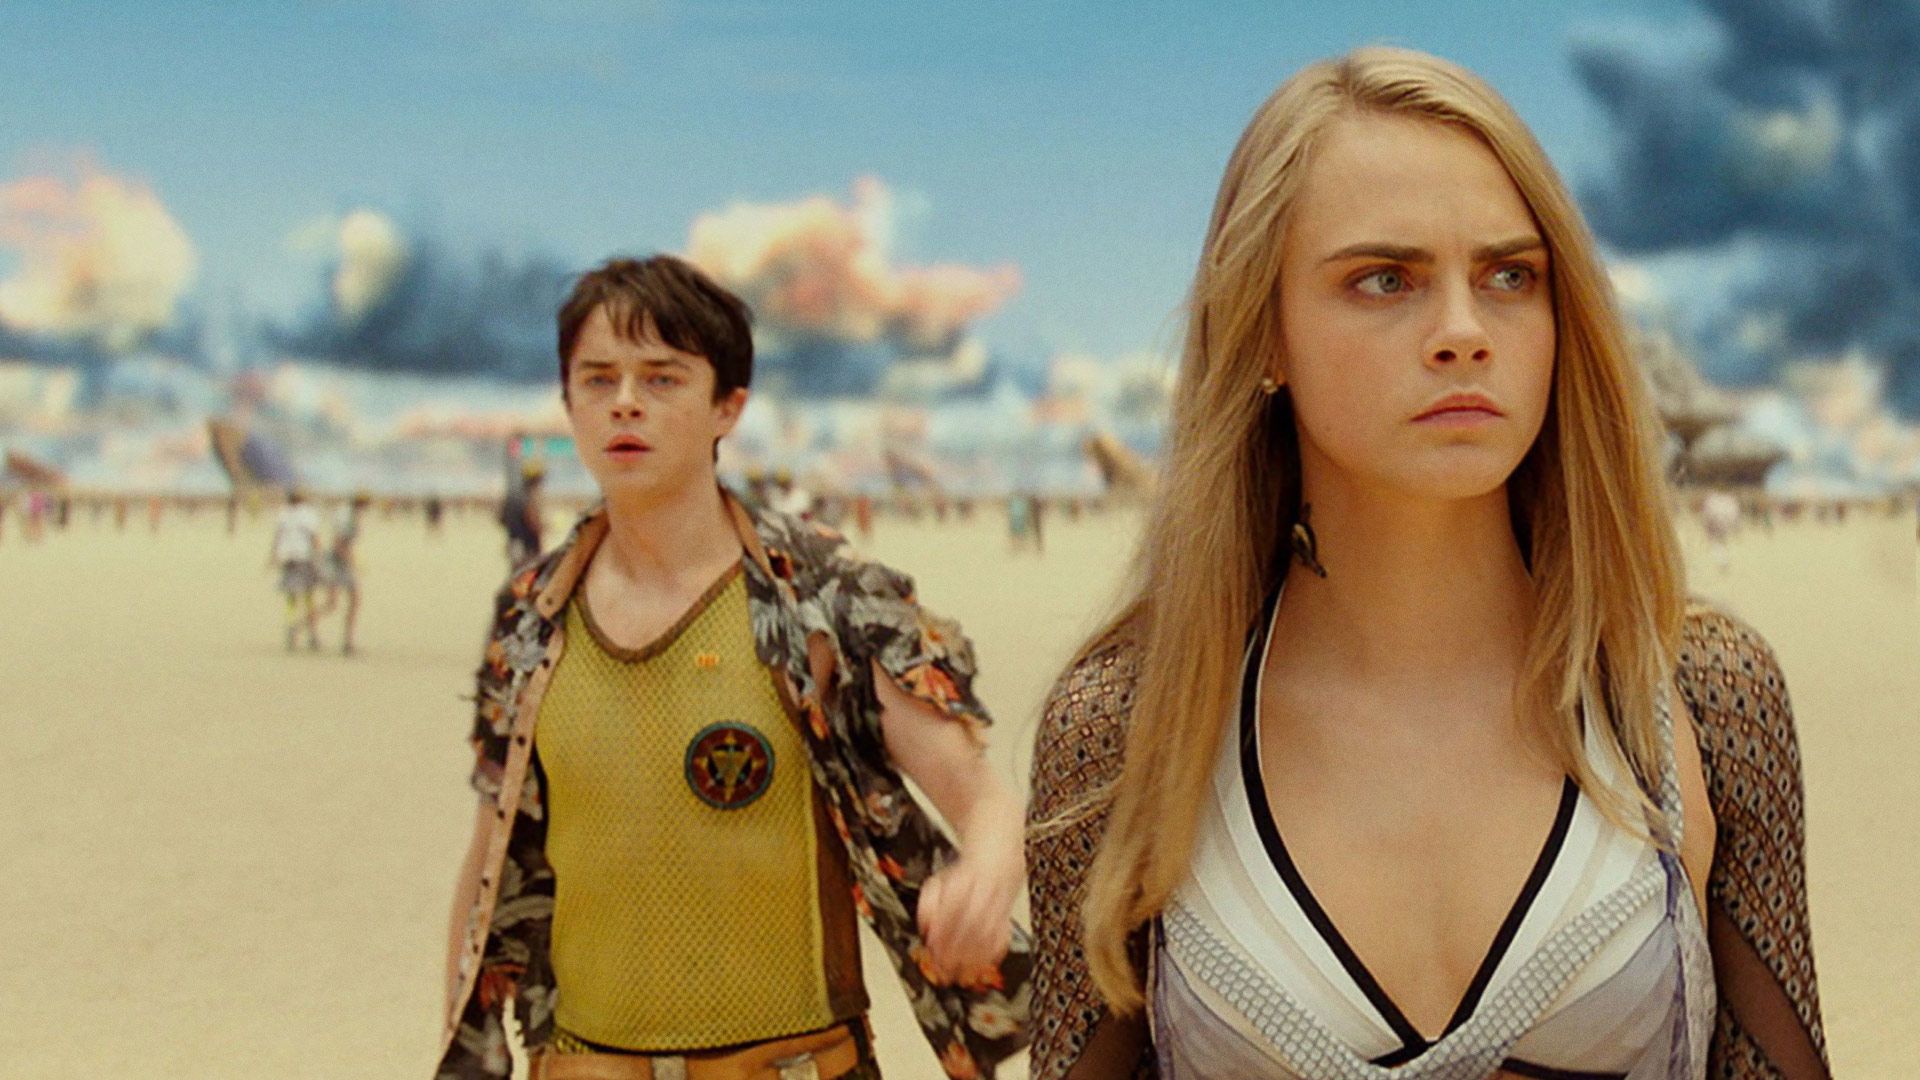 Watch Valerian and the City of a Thousand Planets